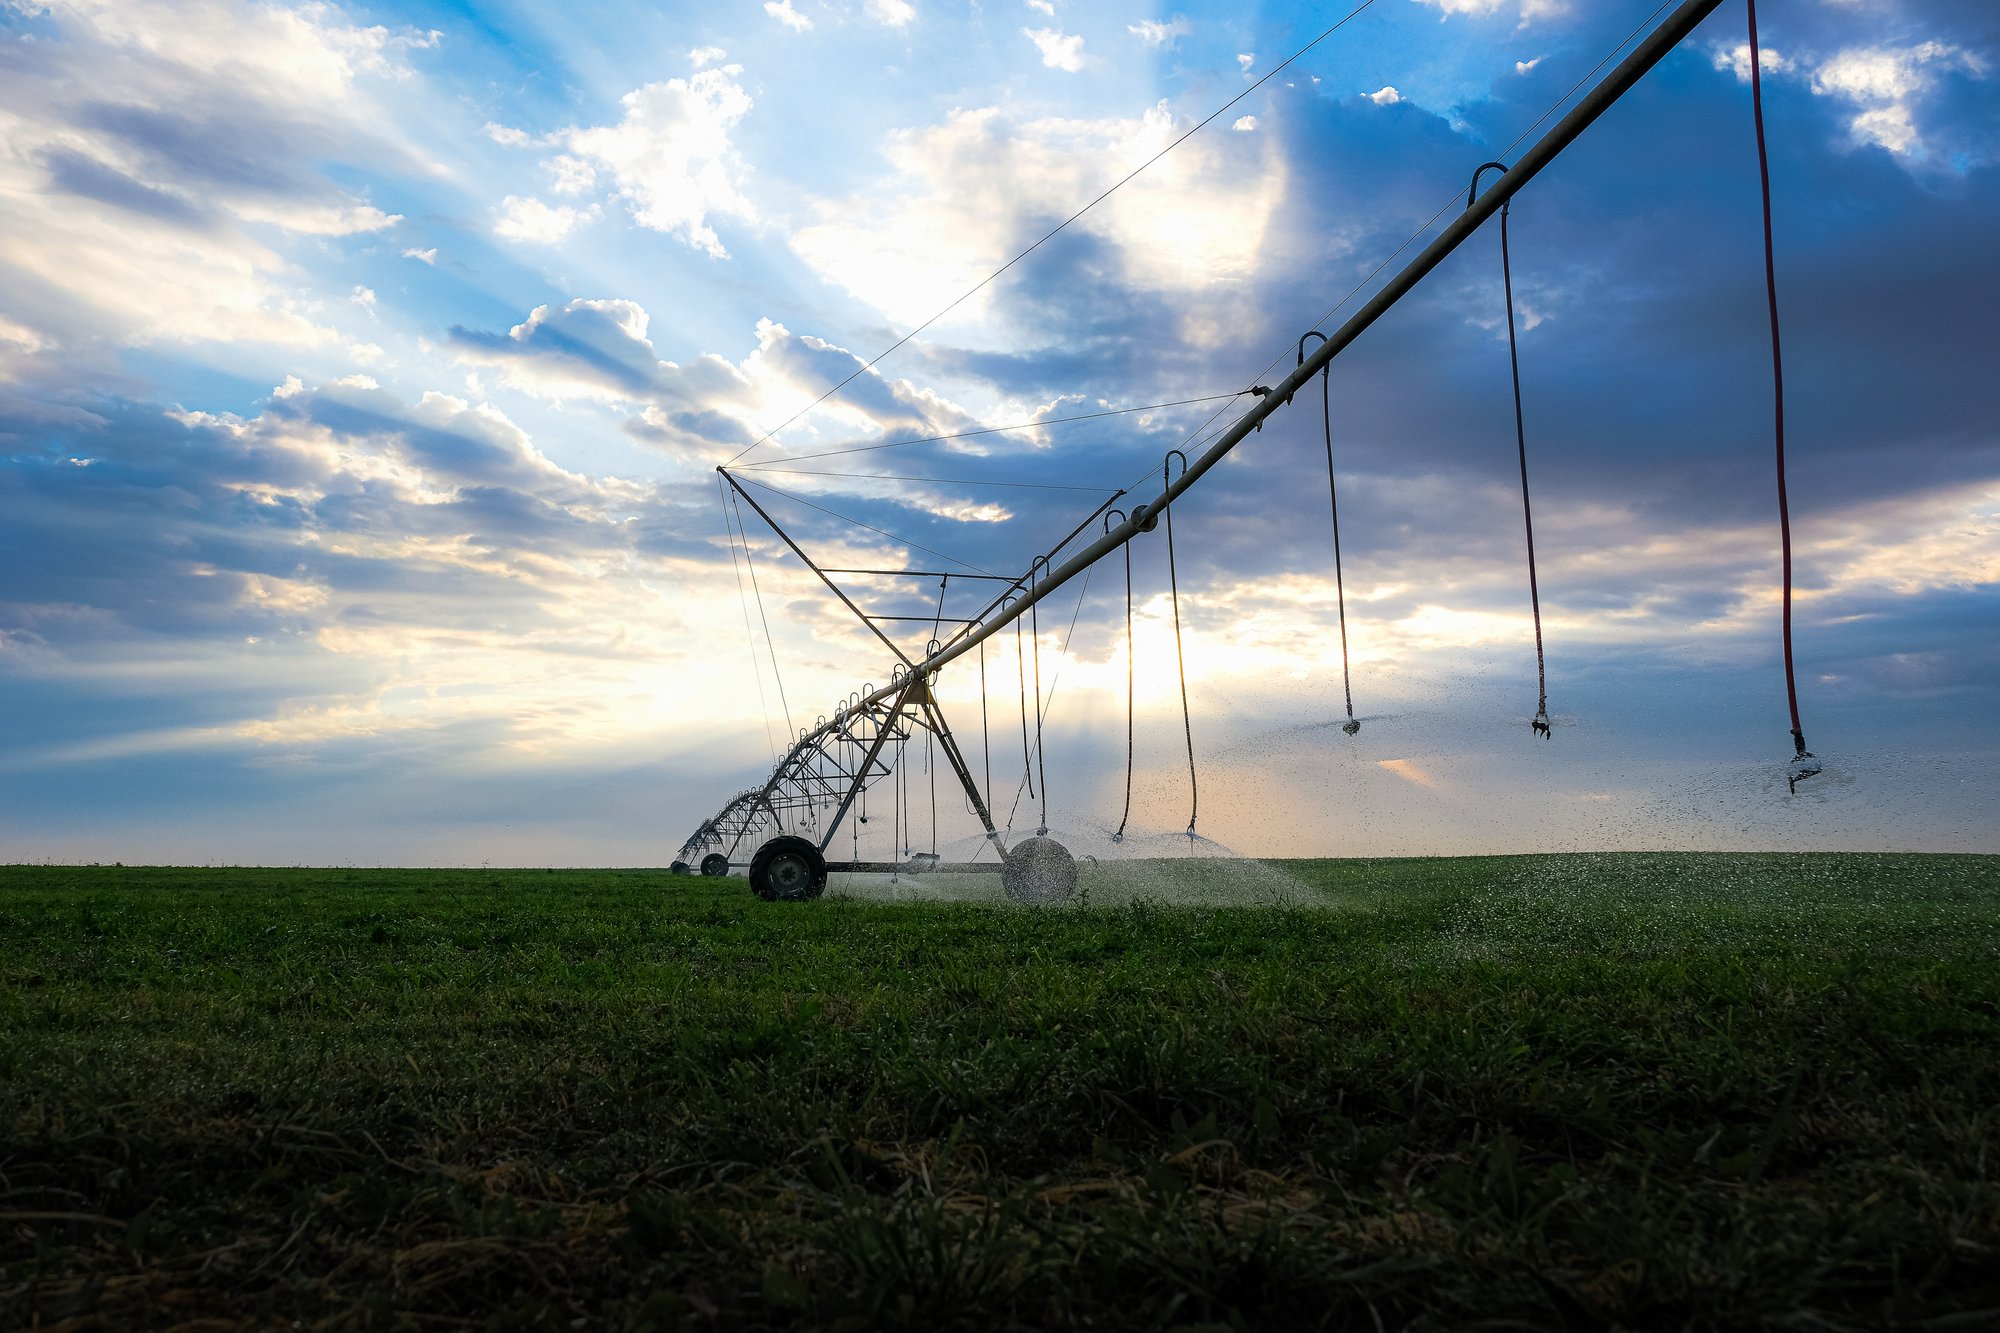 Large metal sprinkler pipes in an open field in front of a cloudy sky